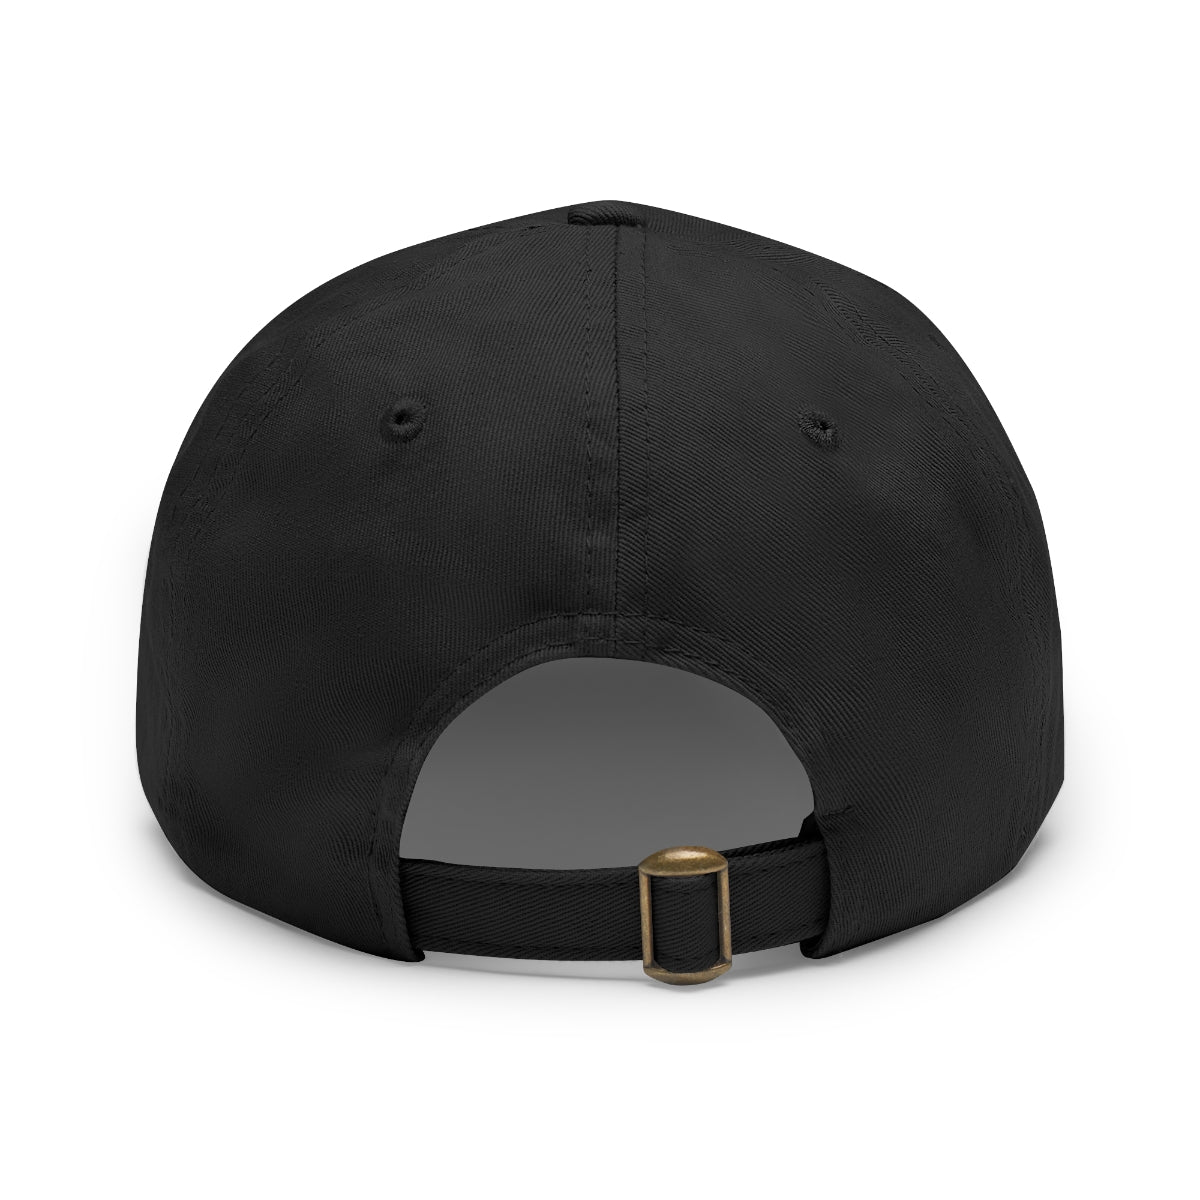 SBU 26 Hat with Leather Patch (Gold)